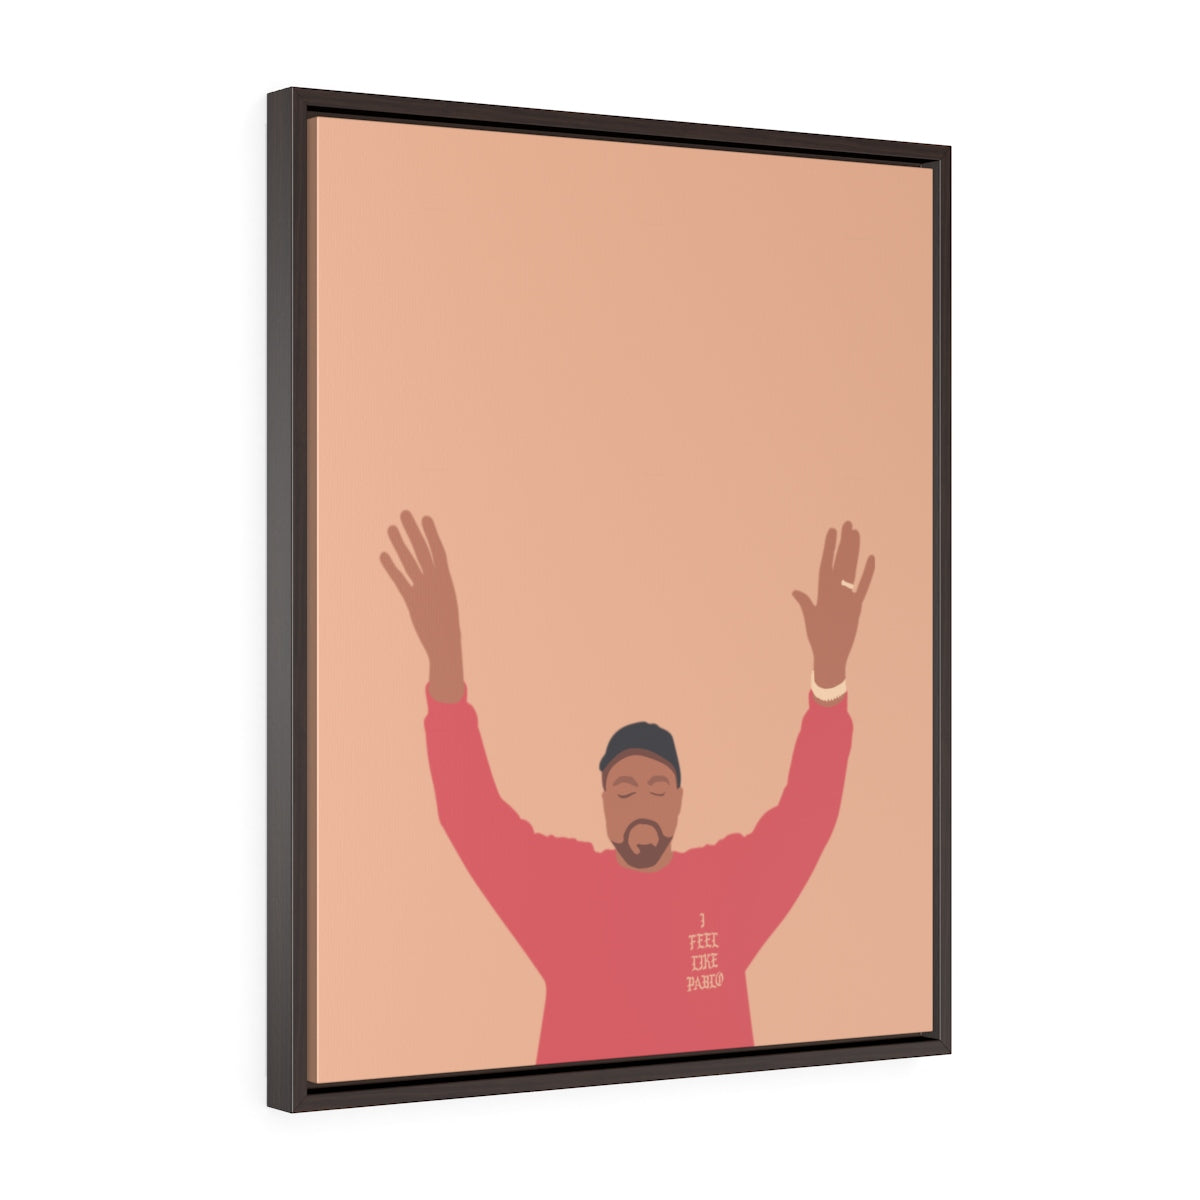 Kanye West I Feel Like Pablo Framed Premium Gallery Wrap Canvas - The Life of Pablo TLOP tour merch inspired-24″ × 30″-Premium Gallery Wraps (1.25″)-Walnut-Archethype